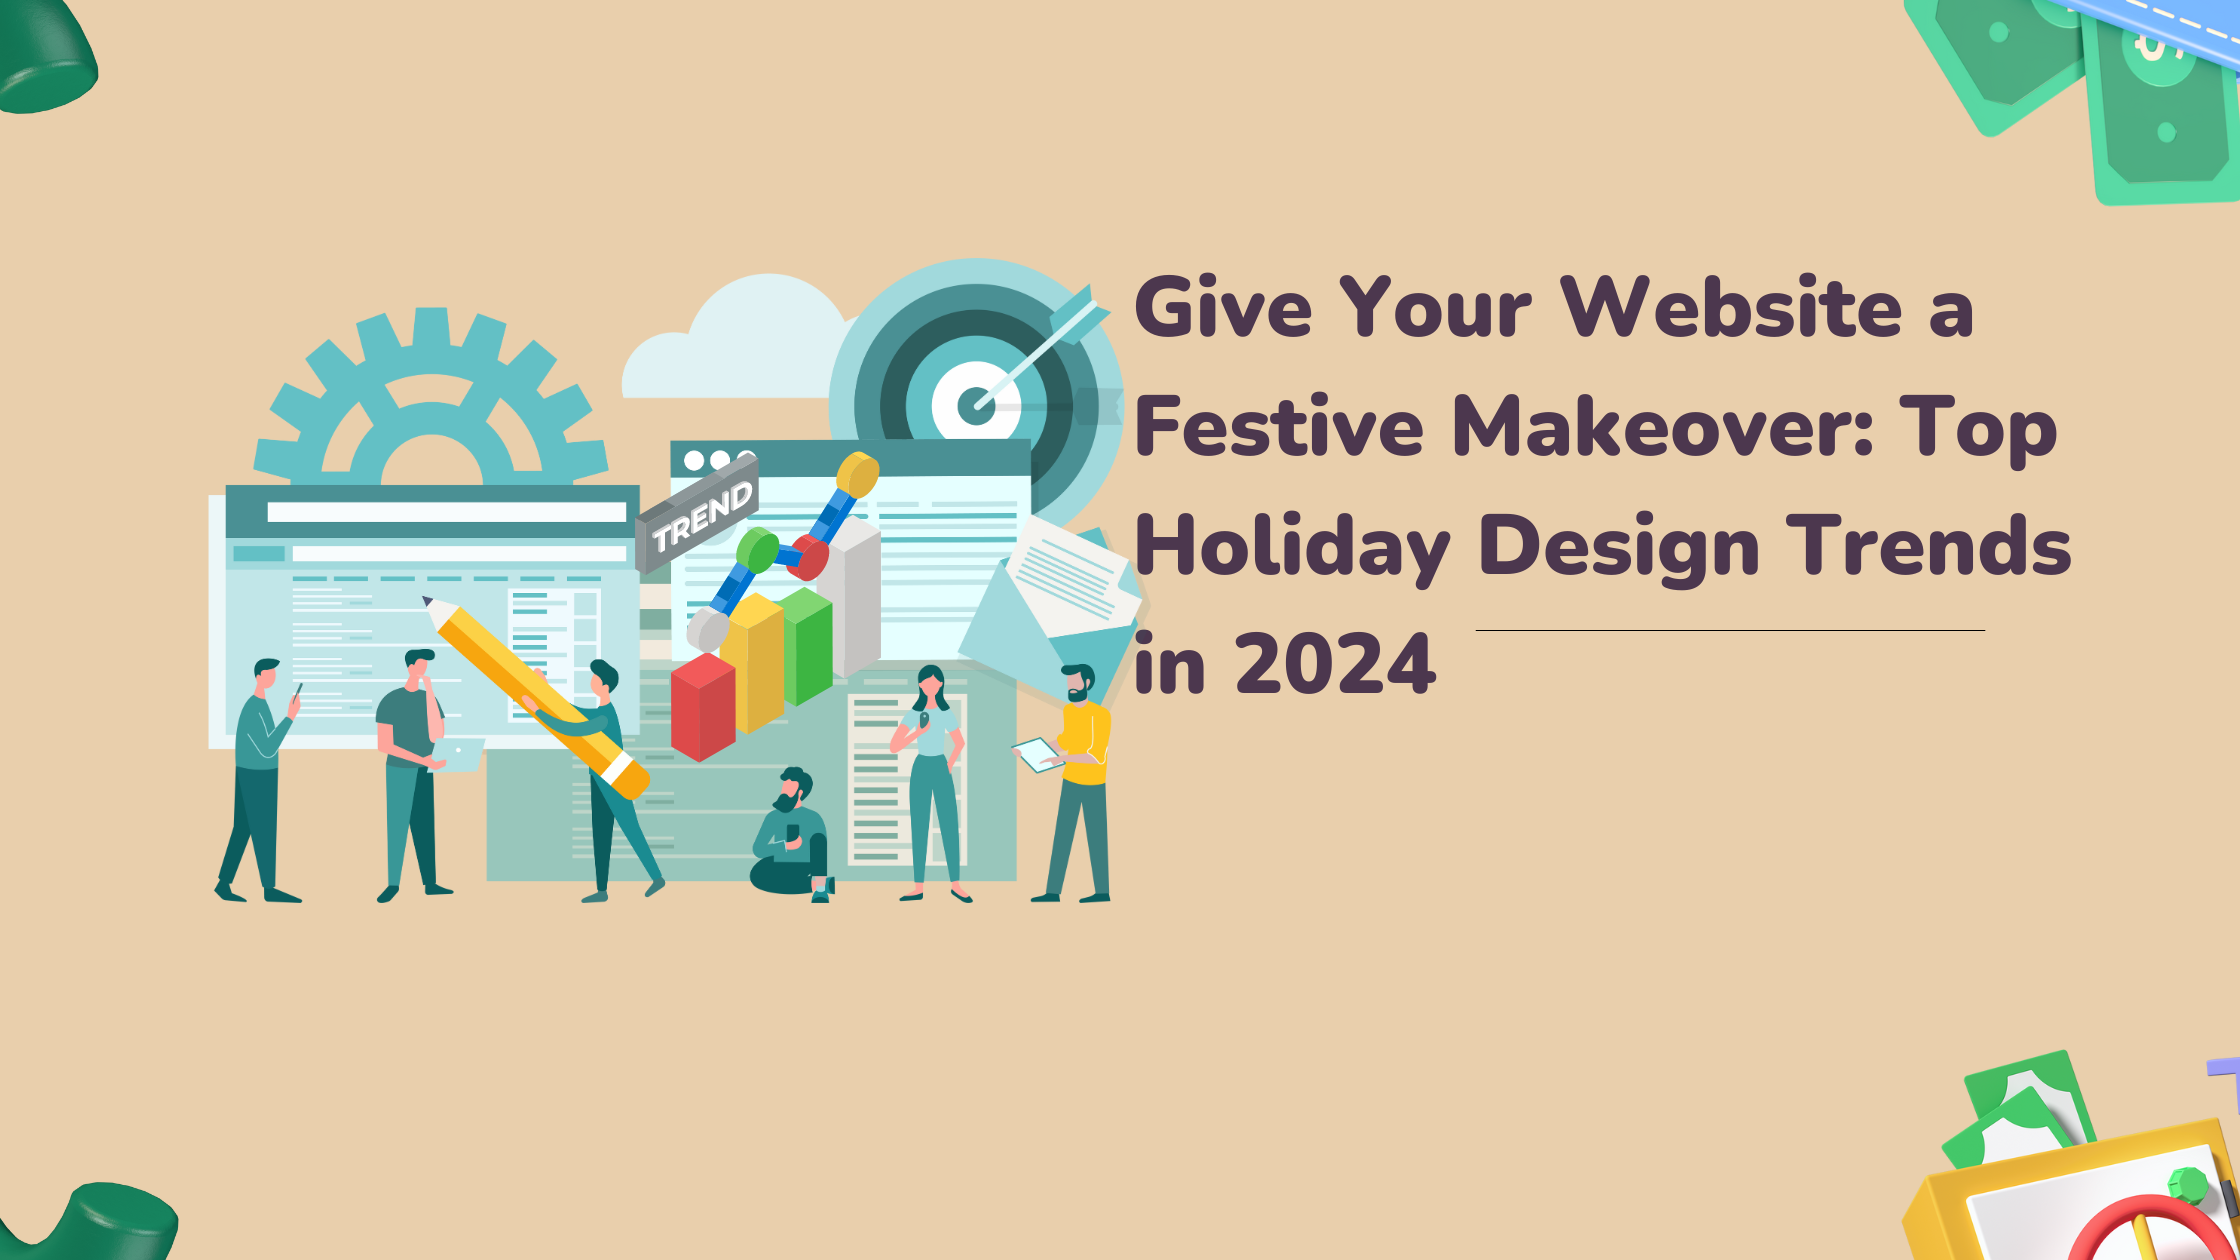 Top 2024 Holiday Design Trends for Festive Online Presence